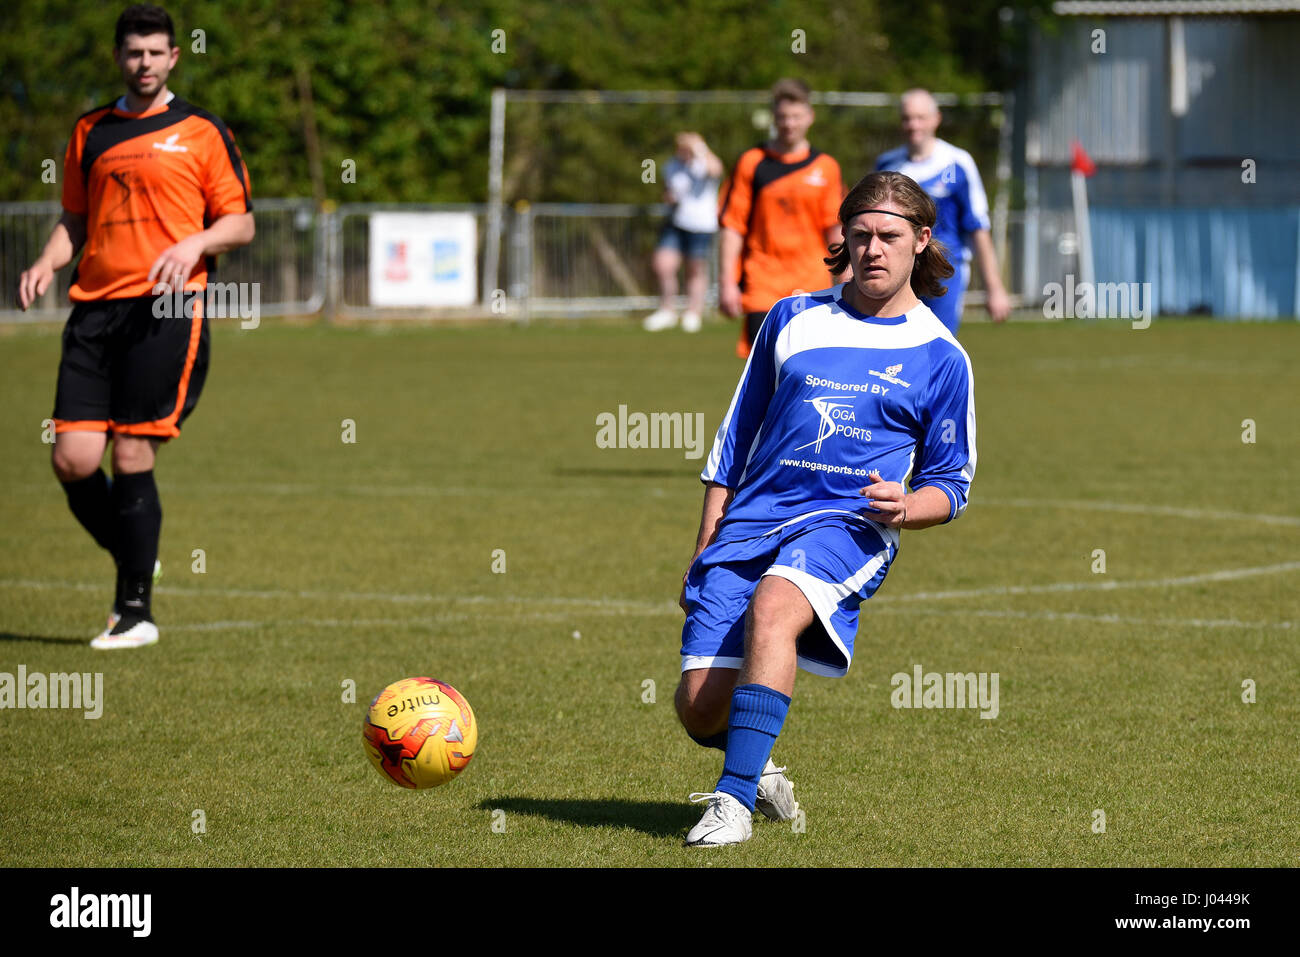 Harry Berry playing for a celebrity football team during a charity match at Bowers & Pitsea football ground, Essex raising money for St Luke's Hospice Stock Photo